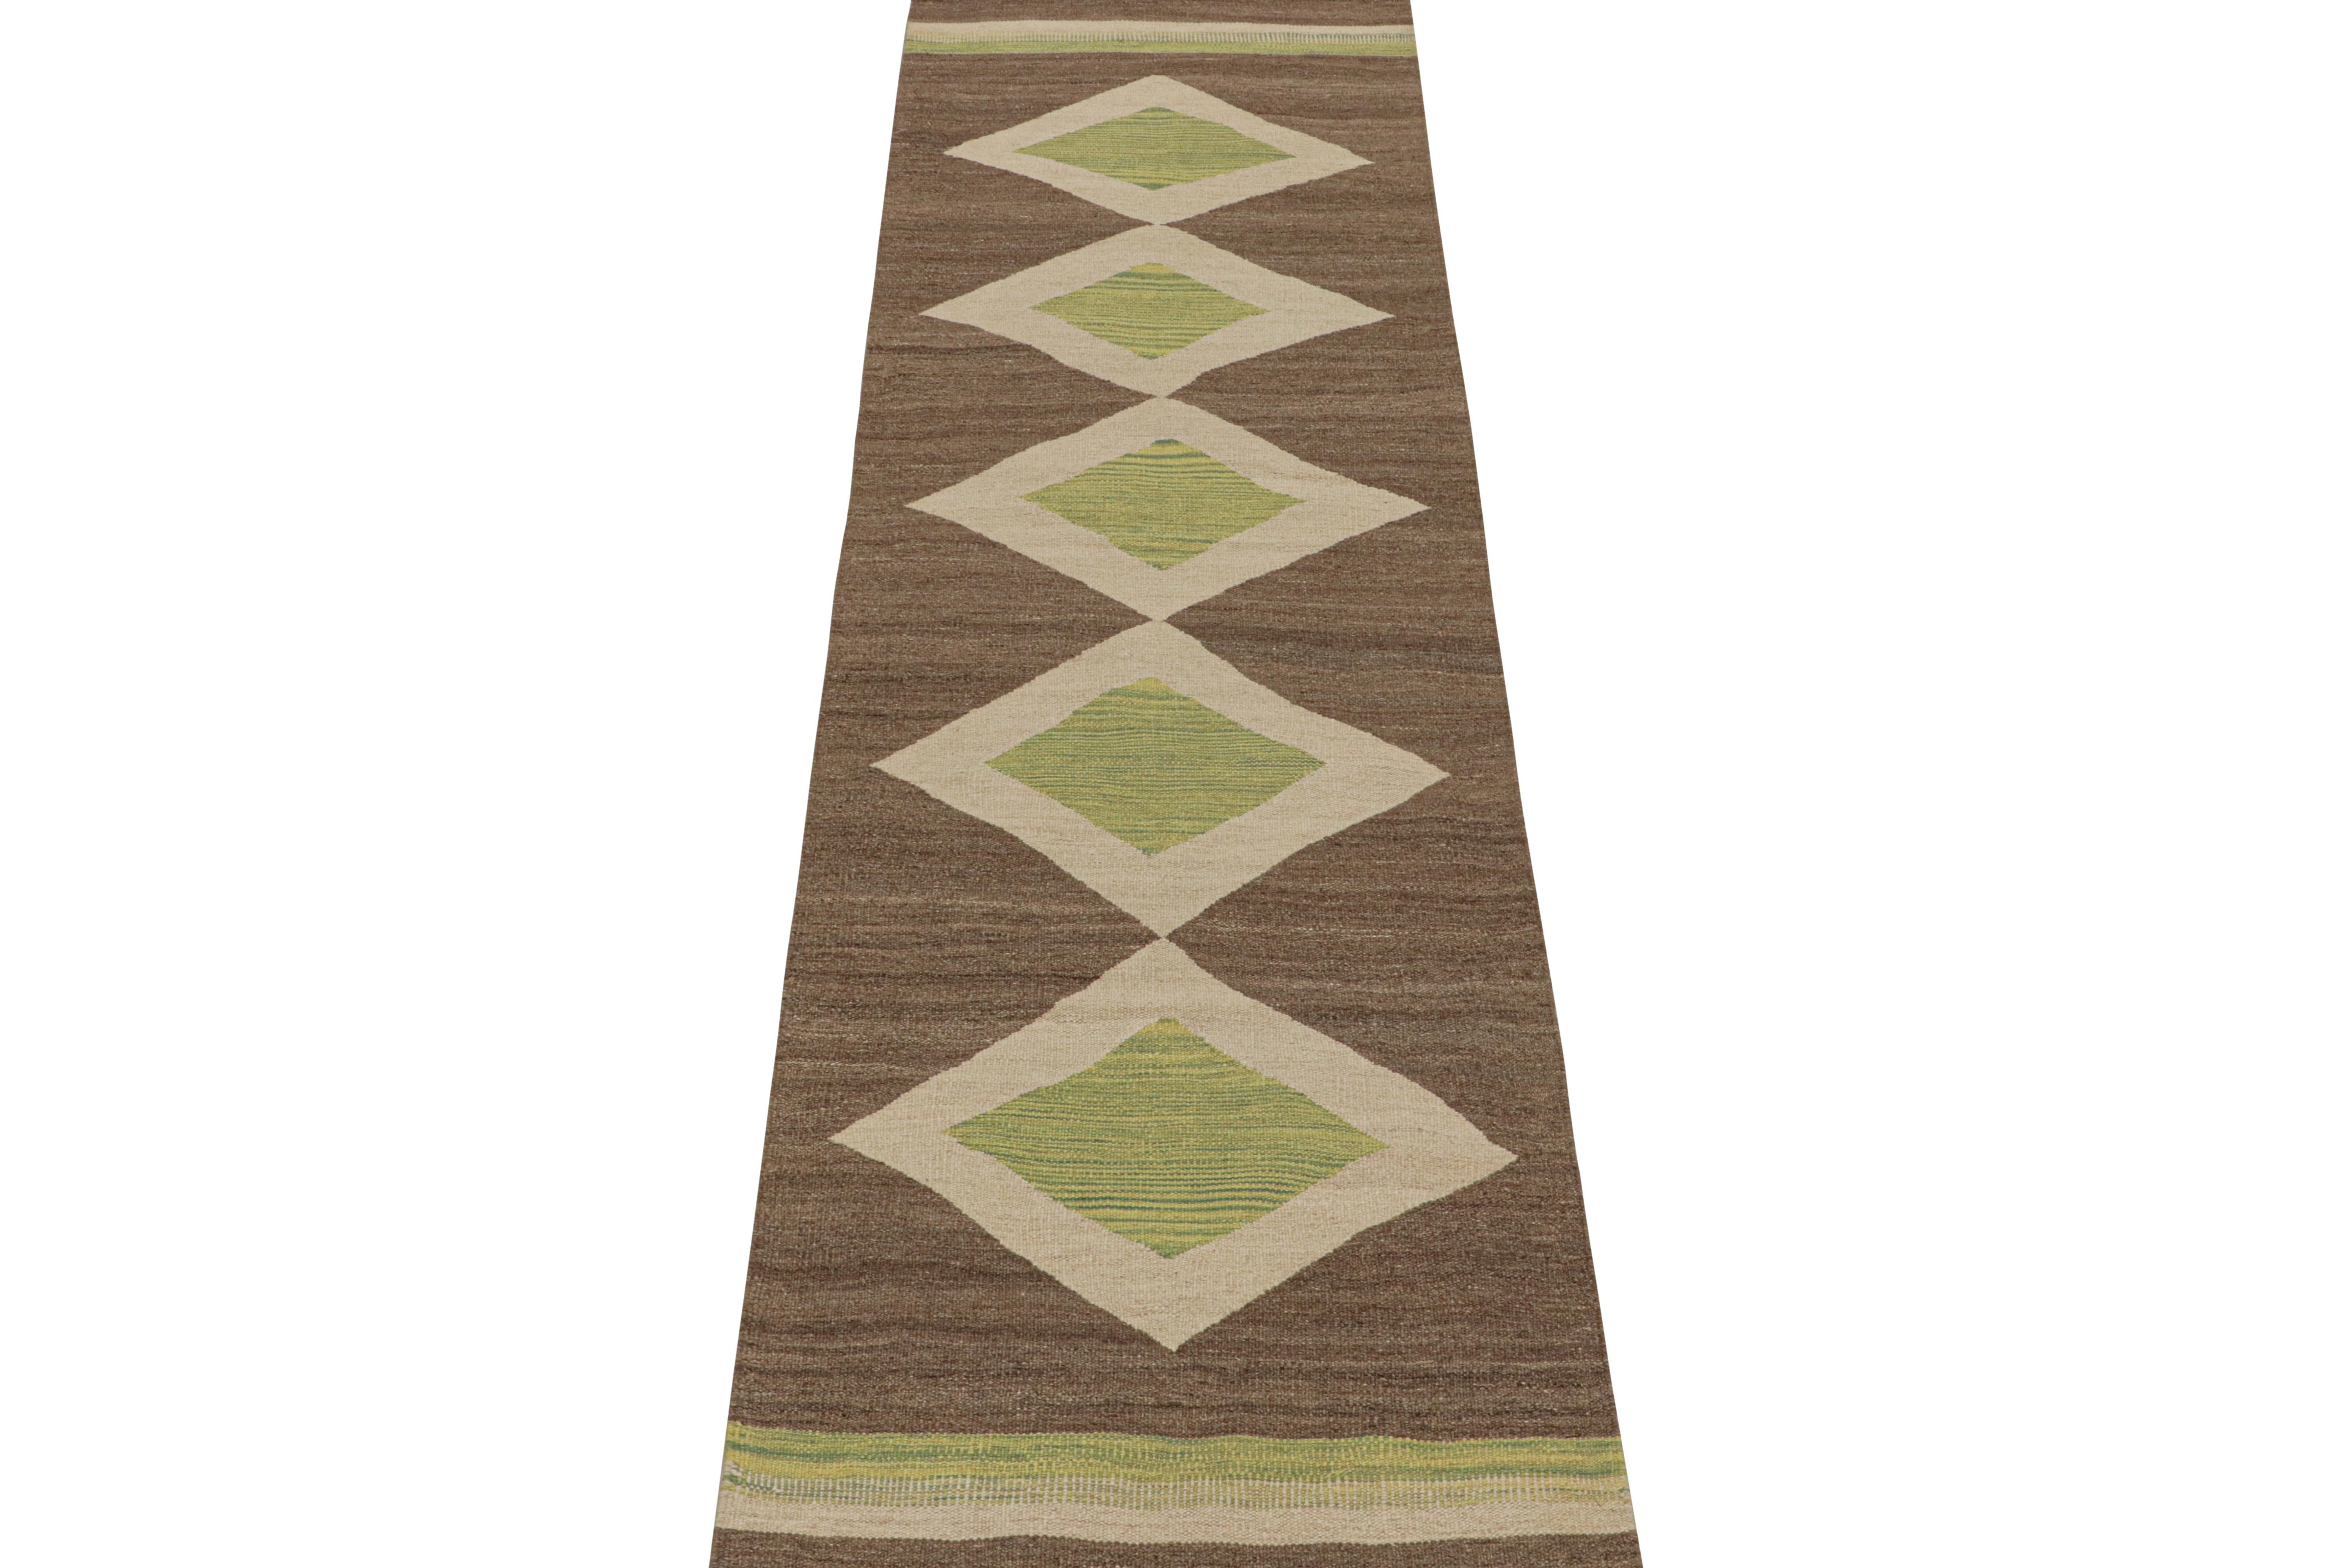 Vintage Persian Kilim Runner in Beige-Brown and Green Medallions by Rug & Kilim In Good Condition For Sale In Long Island City, NY